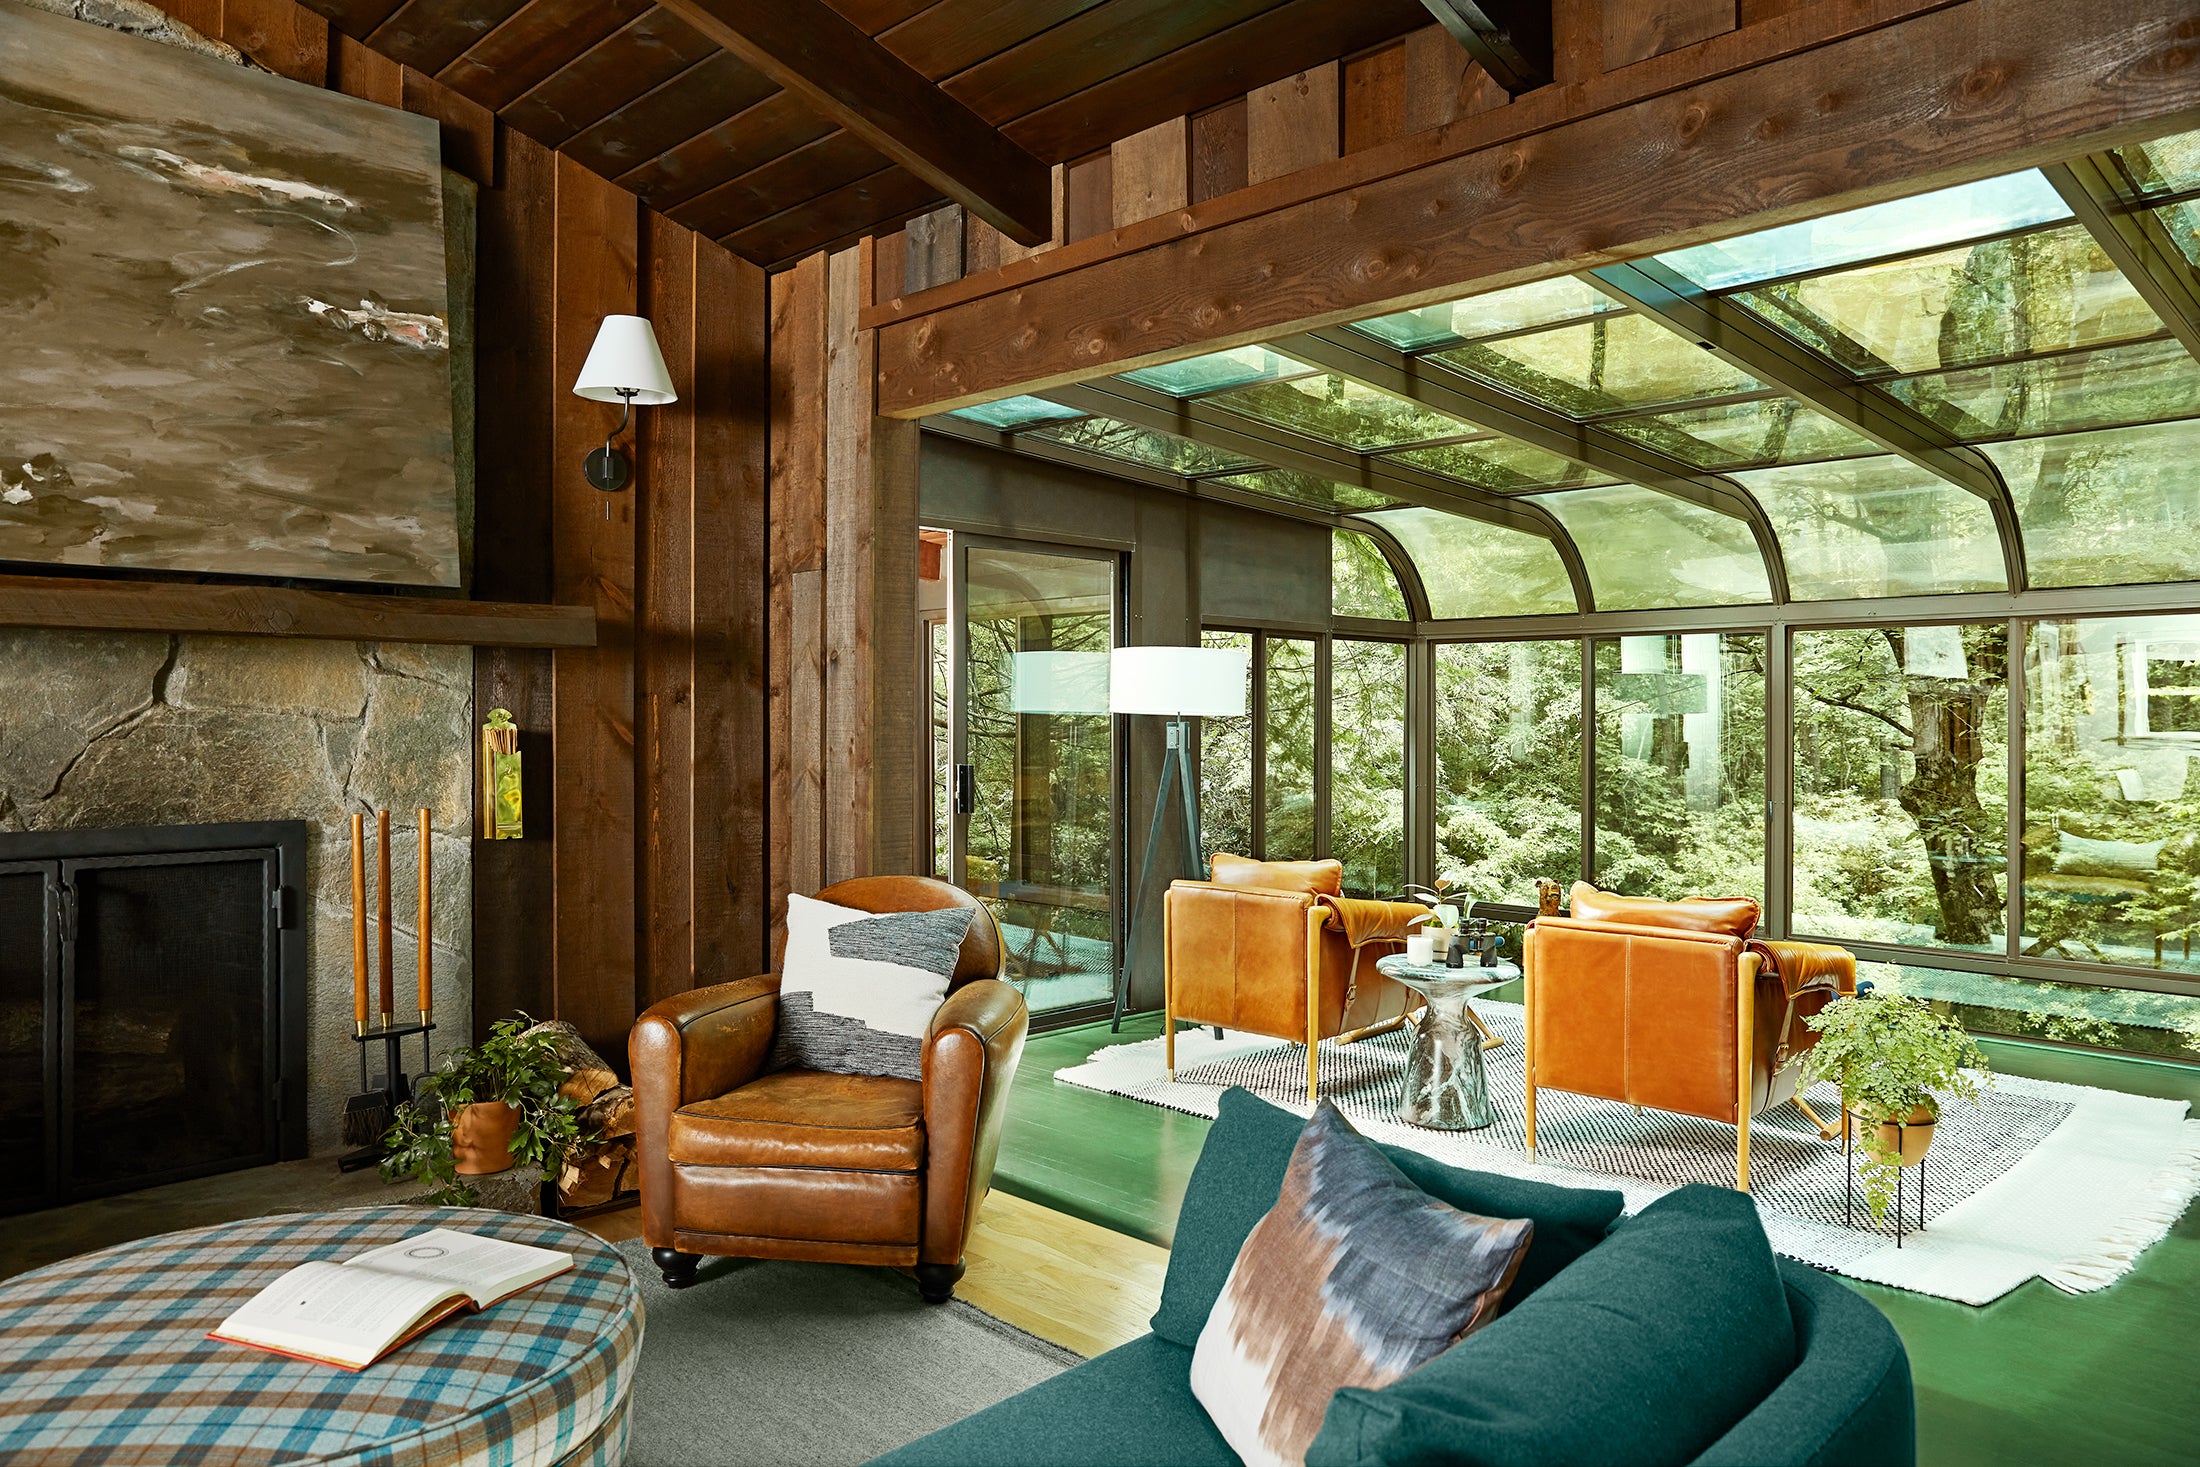 Color Complements All the Wood Details in This ’70s Home Turned Modern Cabin